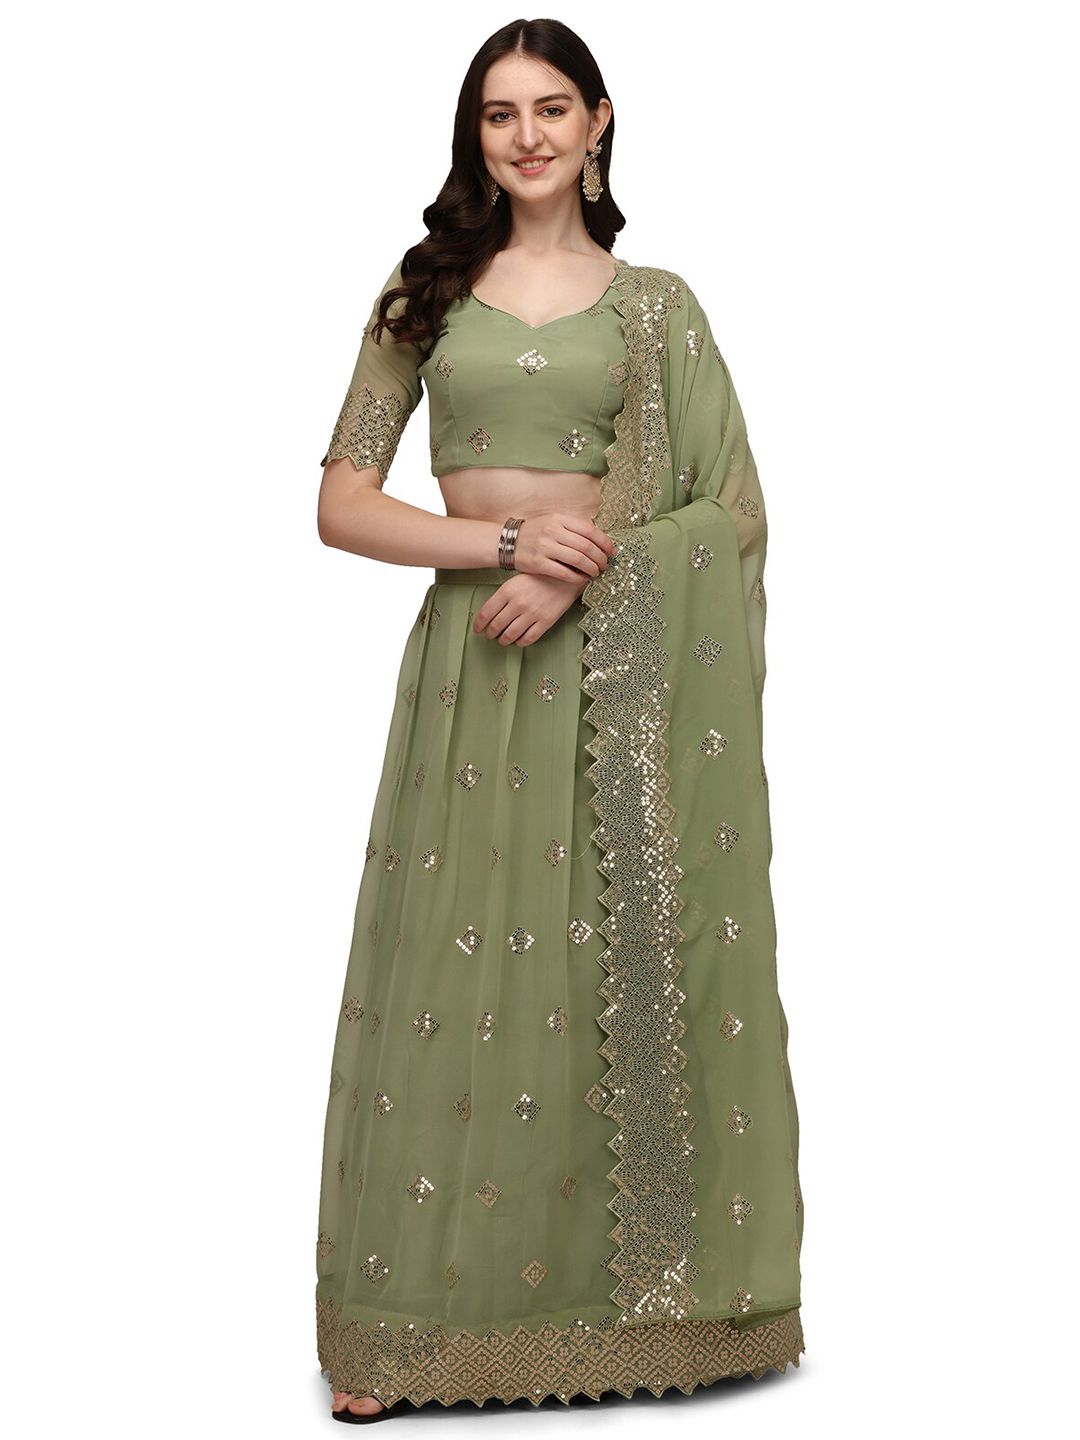 Pratham Blue Olive Green & Gold Sequinned Semi-Stitched Lehenga & Unstitched Blouse With Price in India